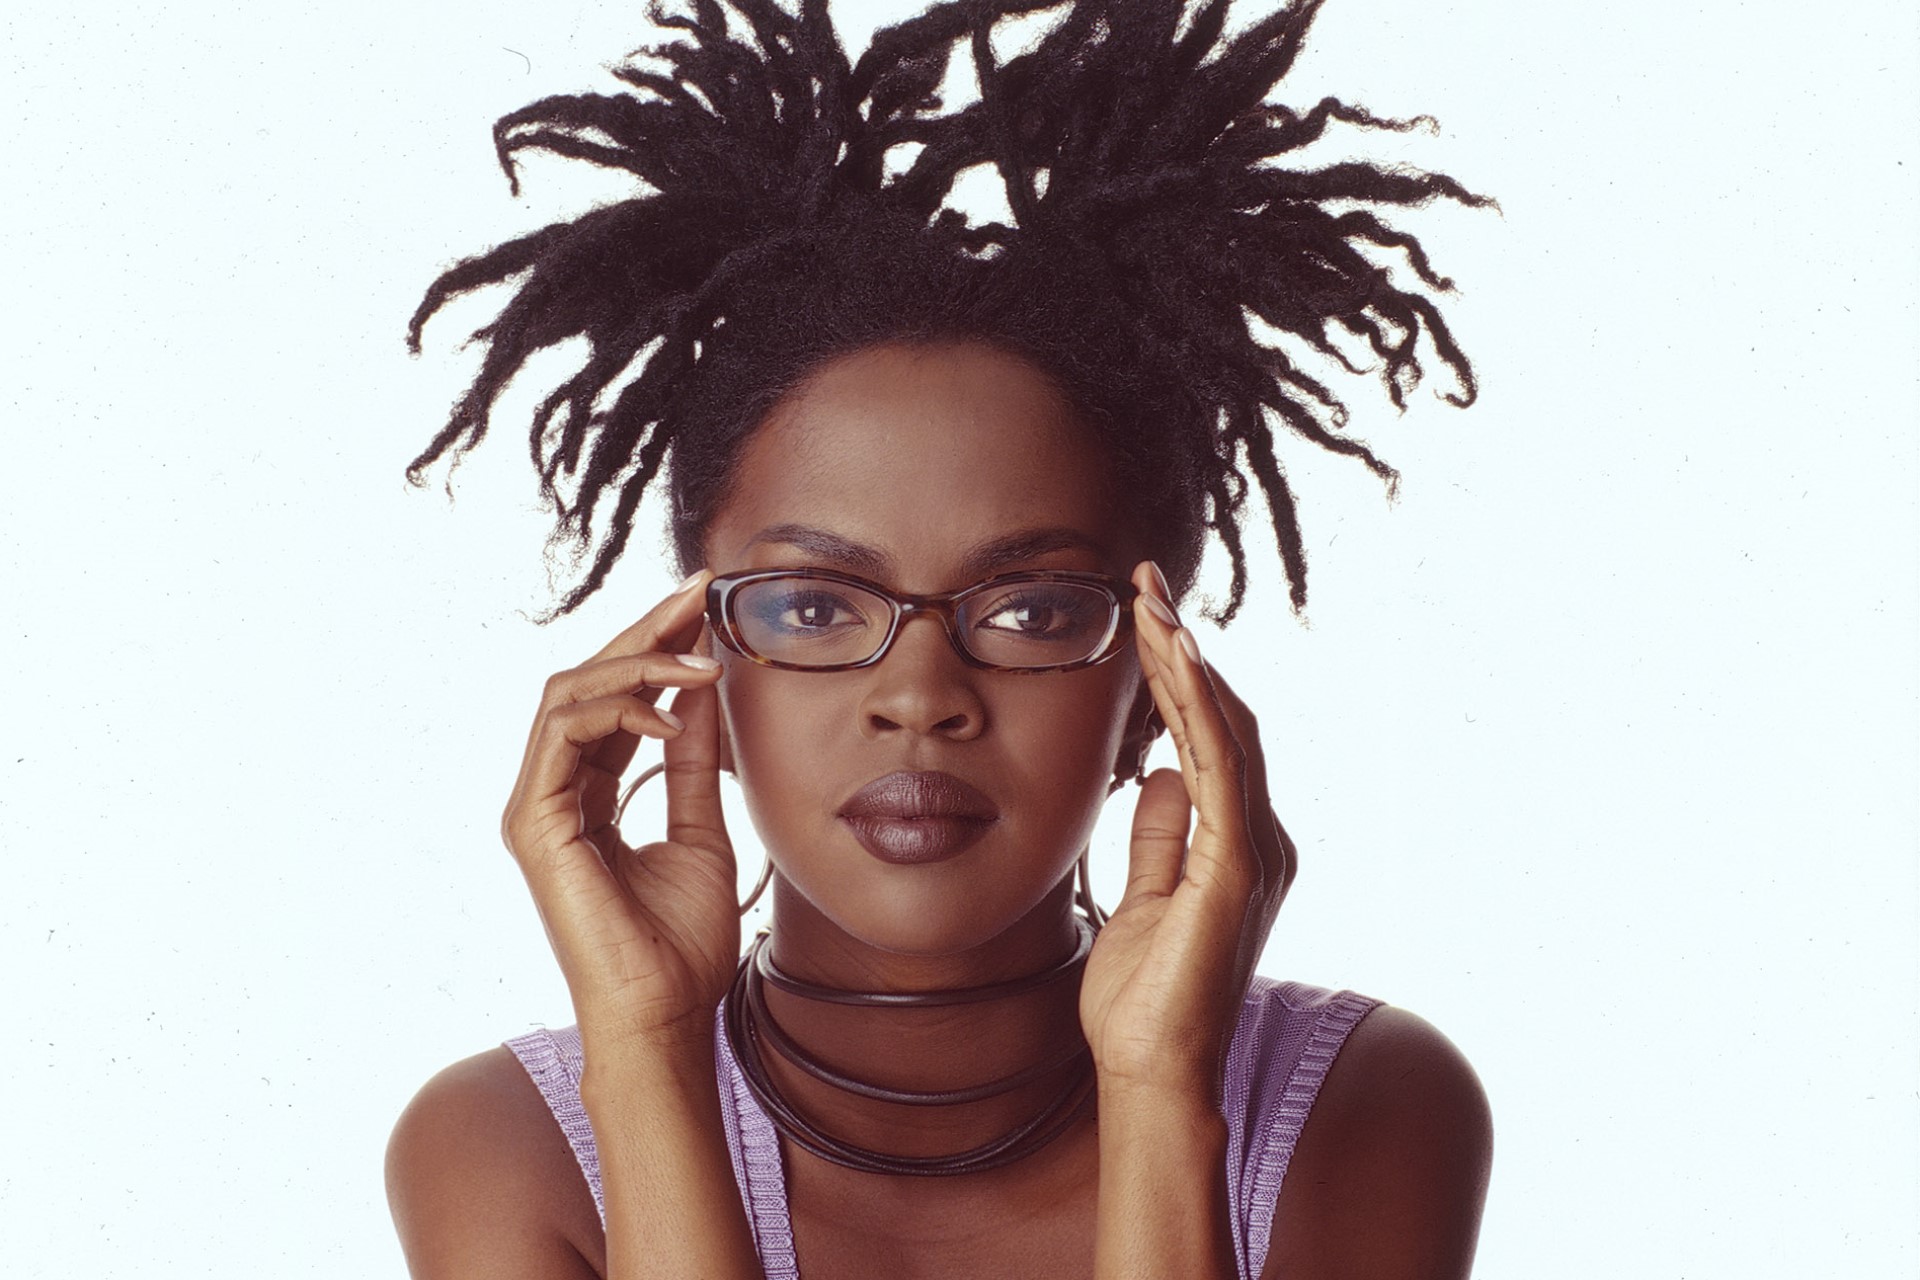 <p>An eight-time Grammy winner, Lauryn Hill stands as a beacon in the history of hip-hop and R&B music. Without a doubt, she shifted the role of women within the music industry with her legendary album 'The Miseducation of Lauryn Hill' (1998). But how much do you know about the woman herself? Her story may surprise you!</p>